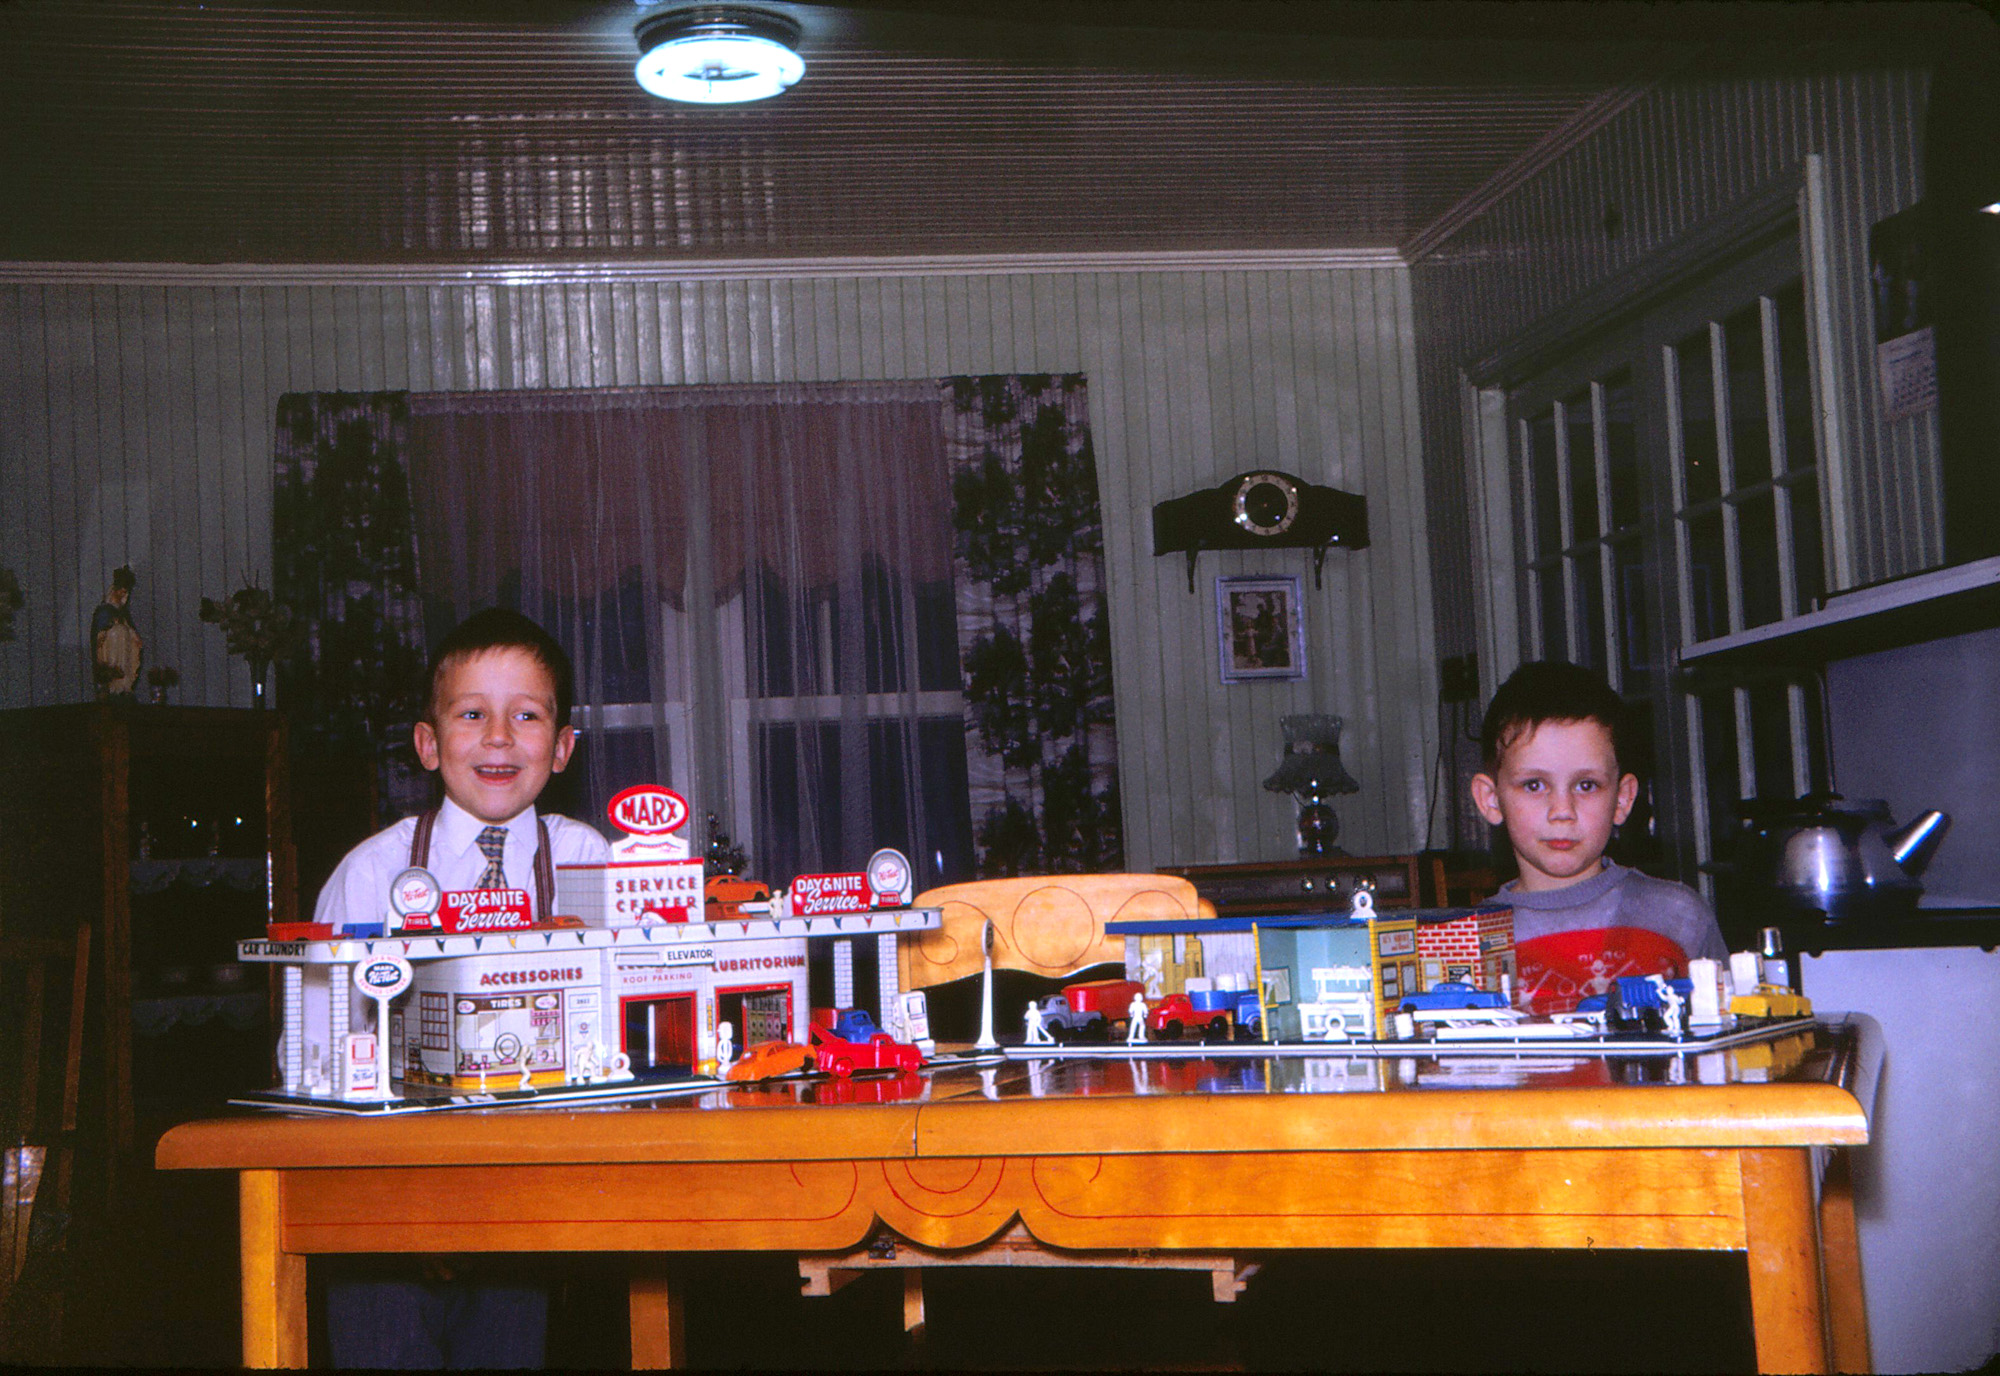 My brother, at left, and me, at right, proudly presenting our Christmas presents, nice garages with plenty of cars and trucks. View full size.